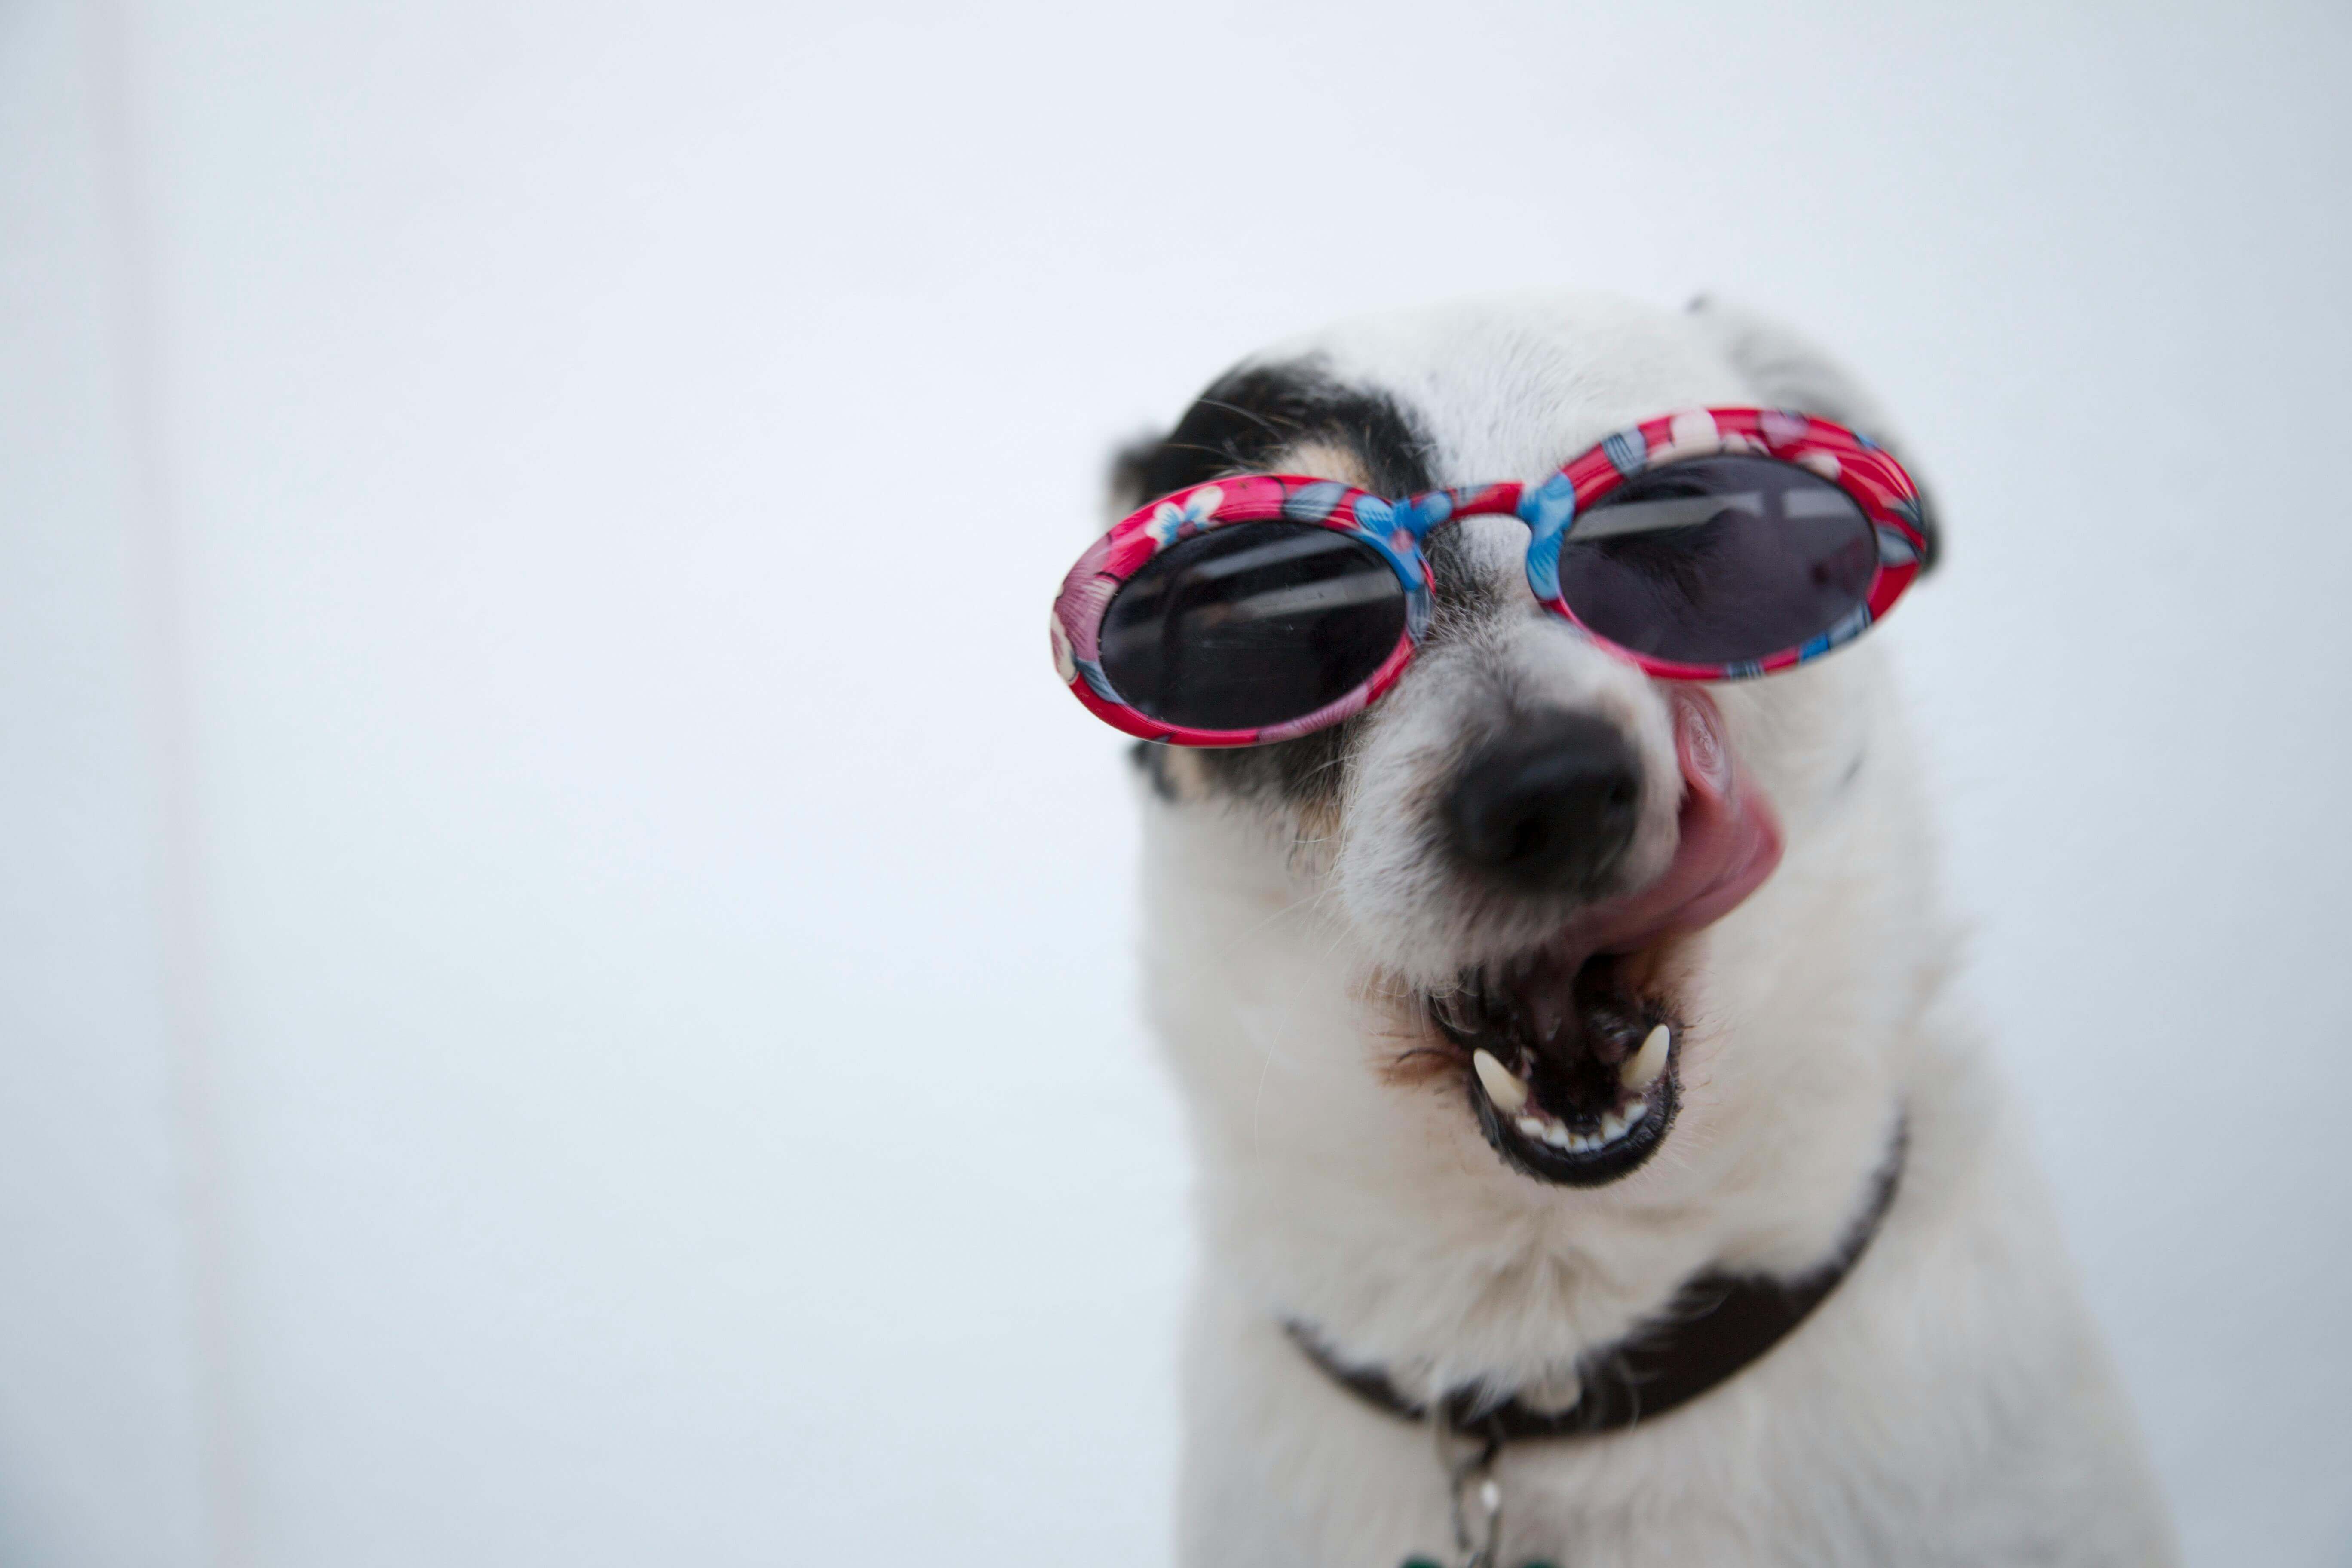 An adorable puppy wearing sunglasses, showcasing a cool and fashionable demeanor.